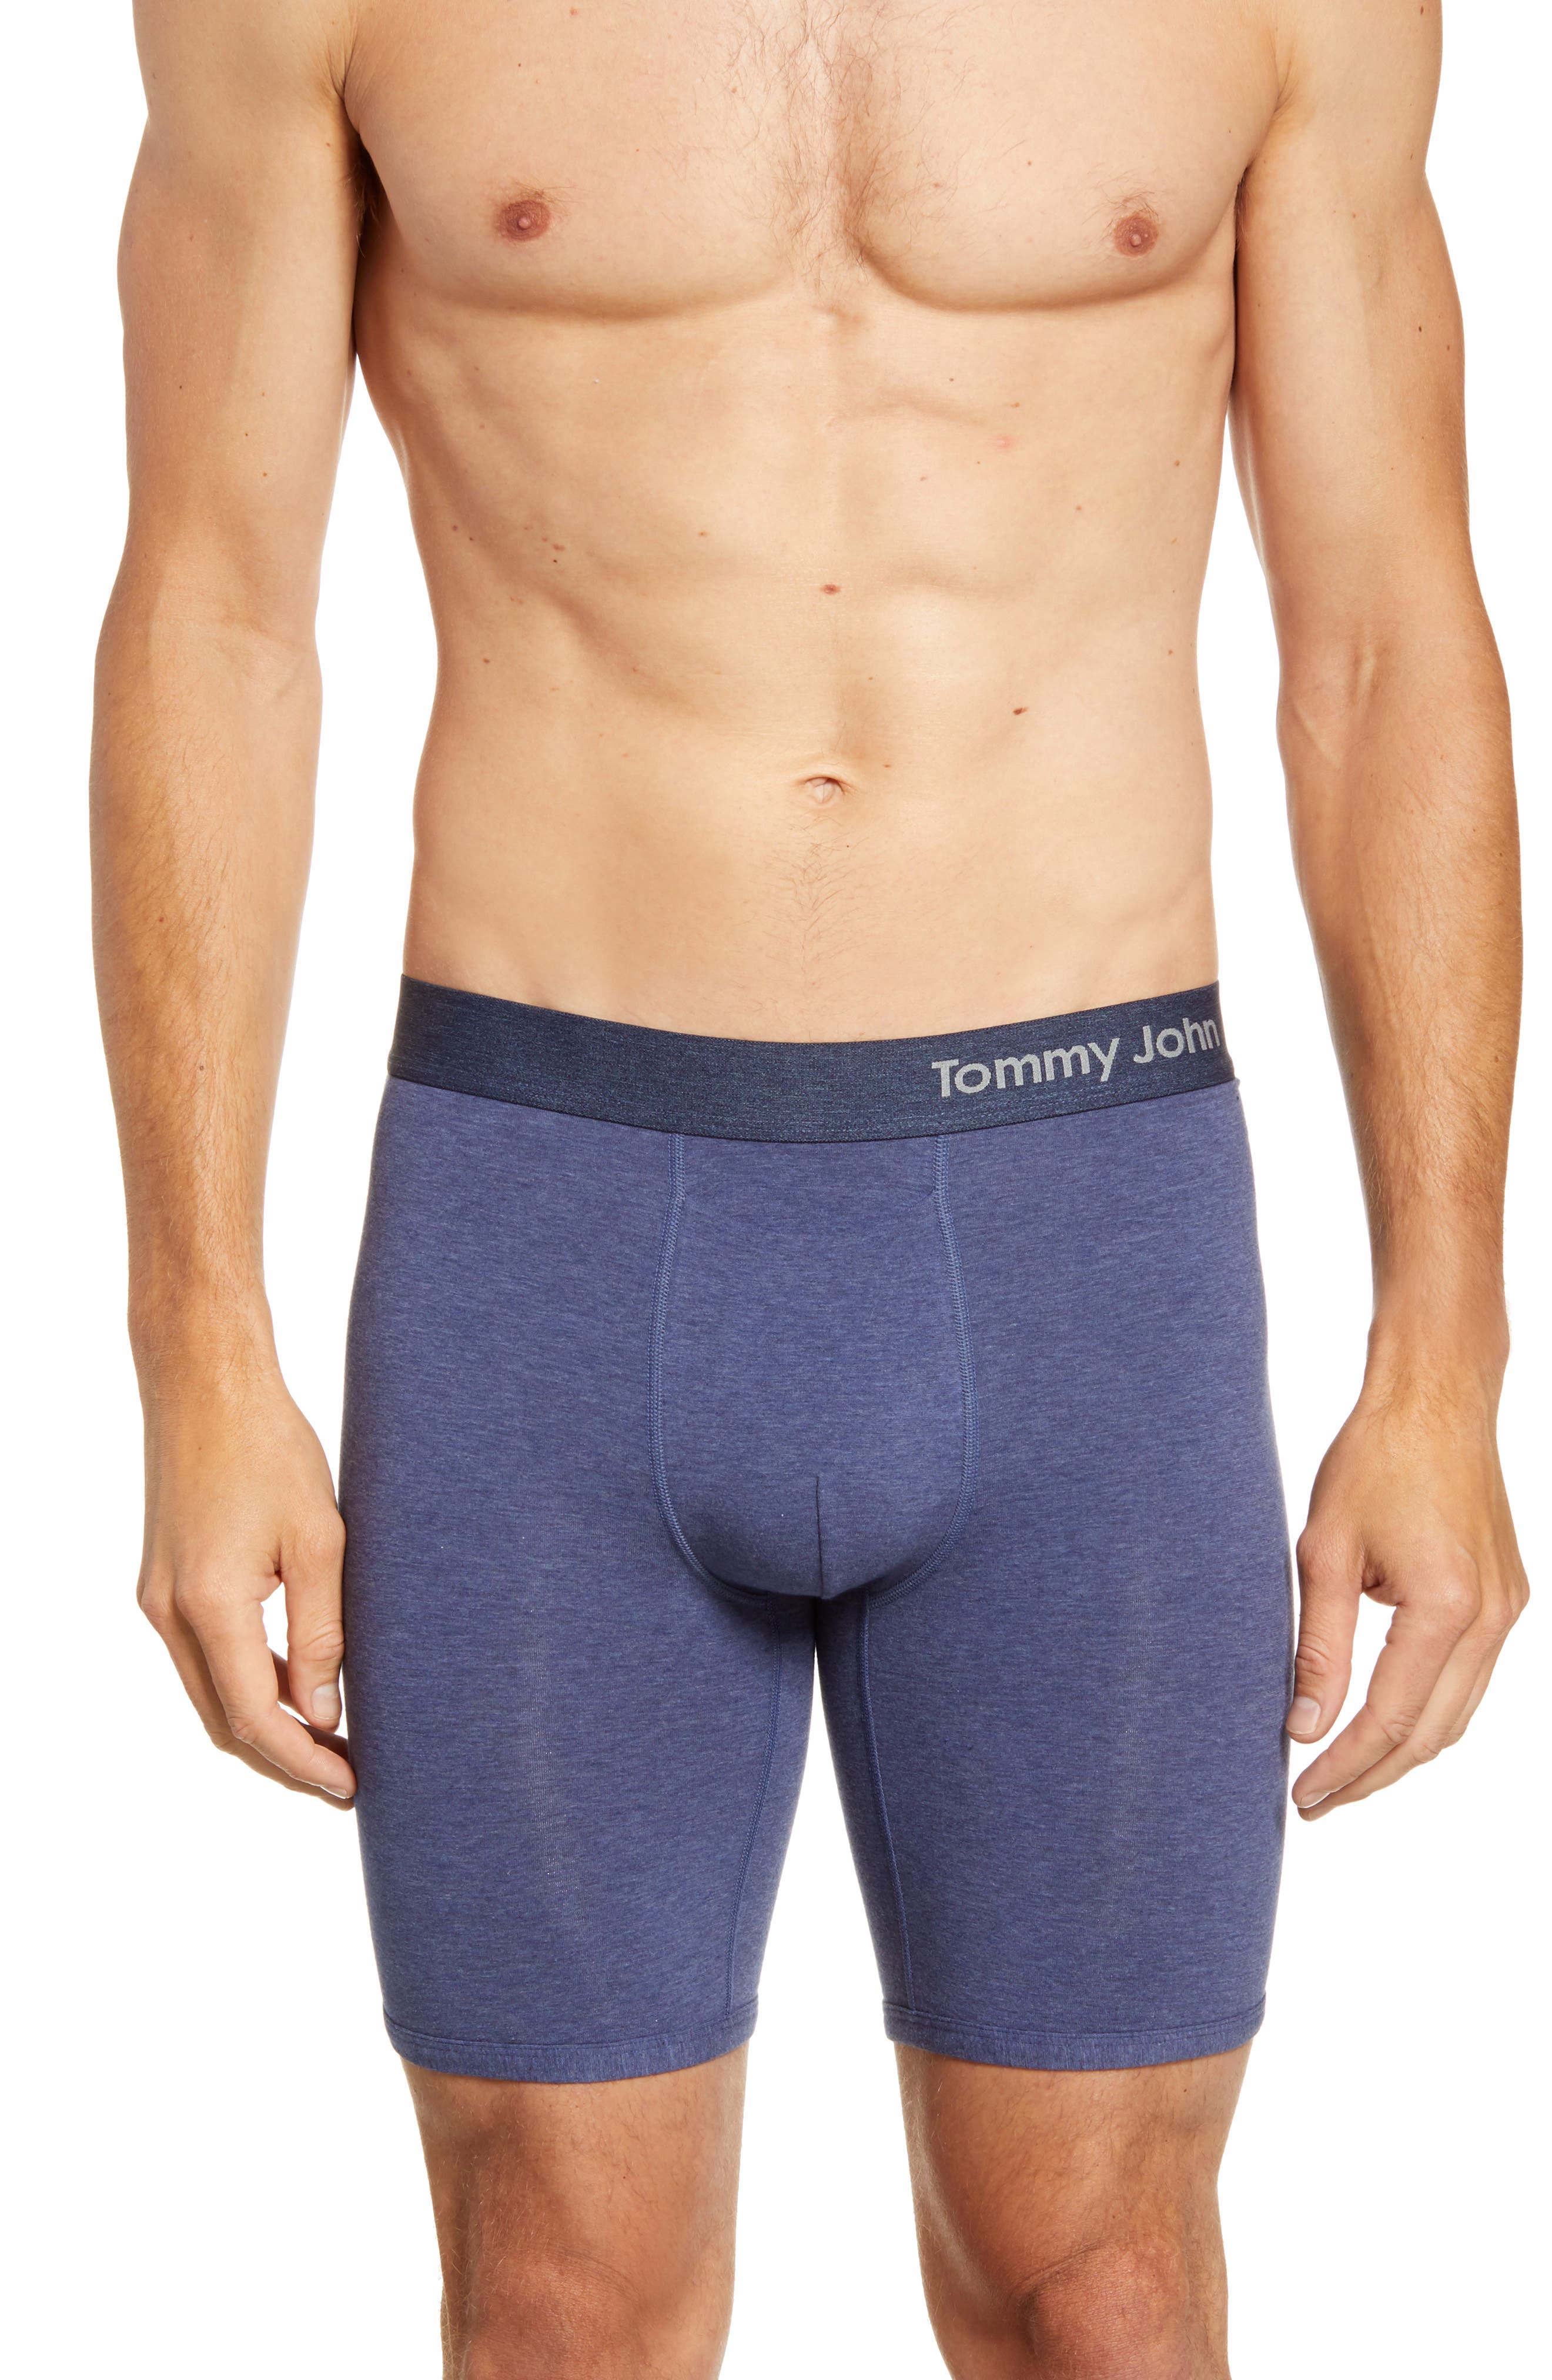 tommy john cool cotton boxer brief